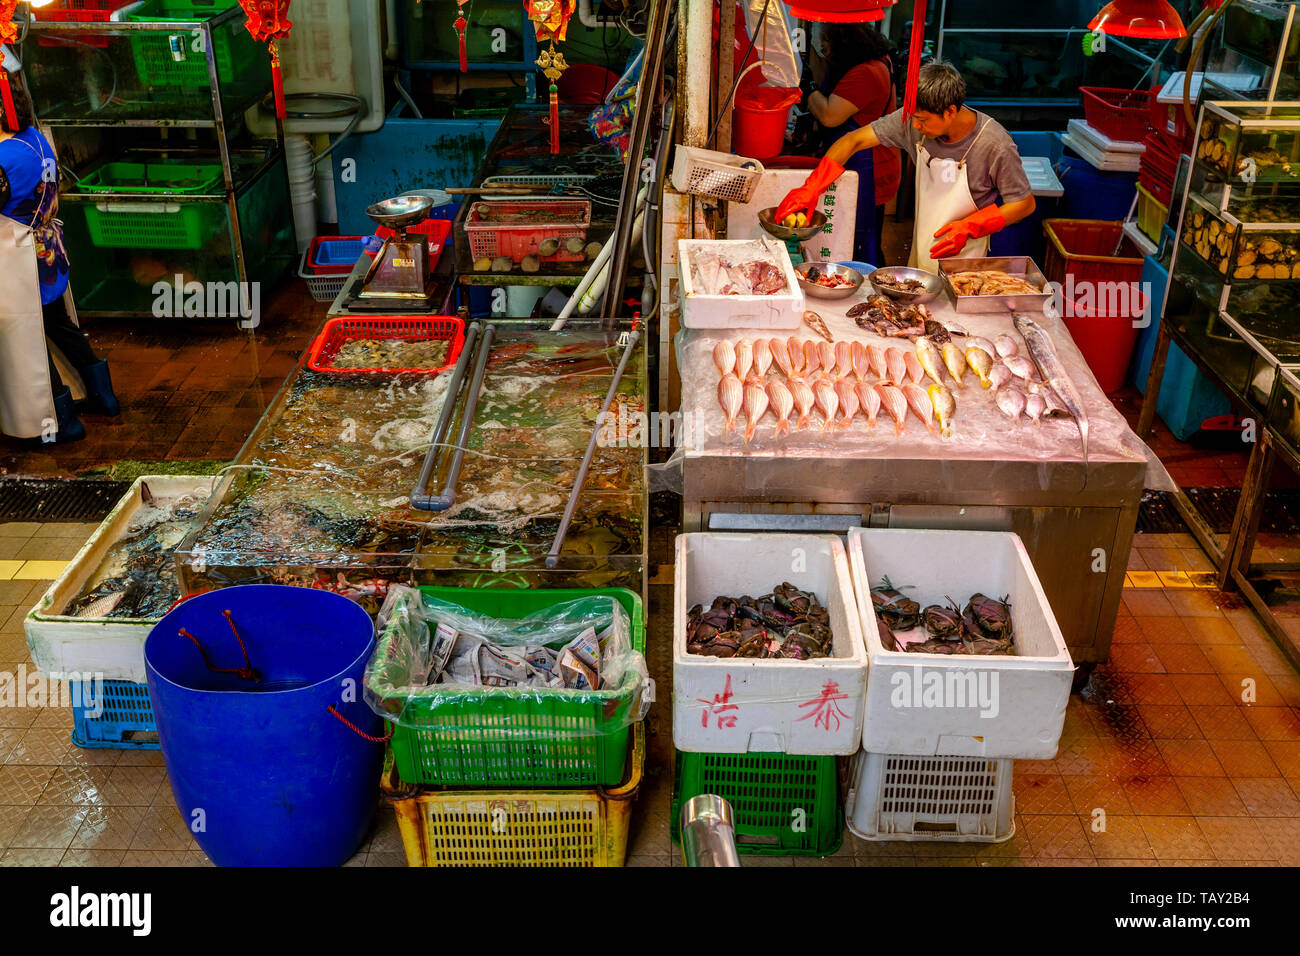 A Wet Fish and Seafood Stall Inside The Bowrington Road Cooked Food Centre, Hong Kong, China Stock Photo